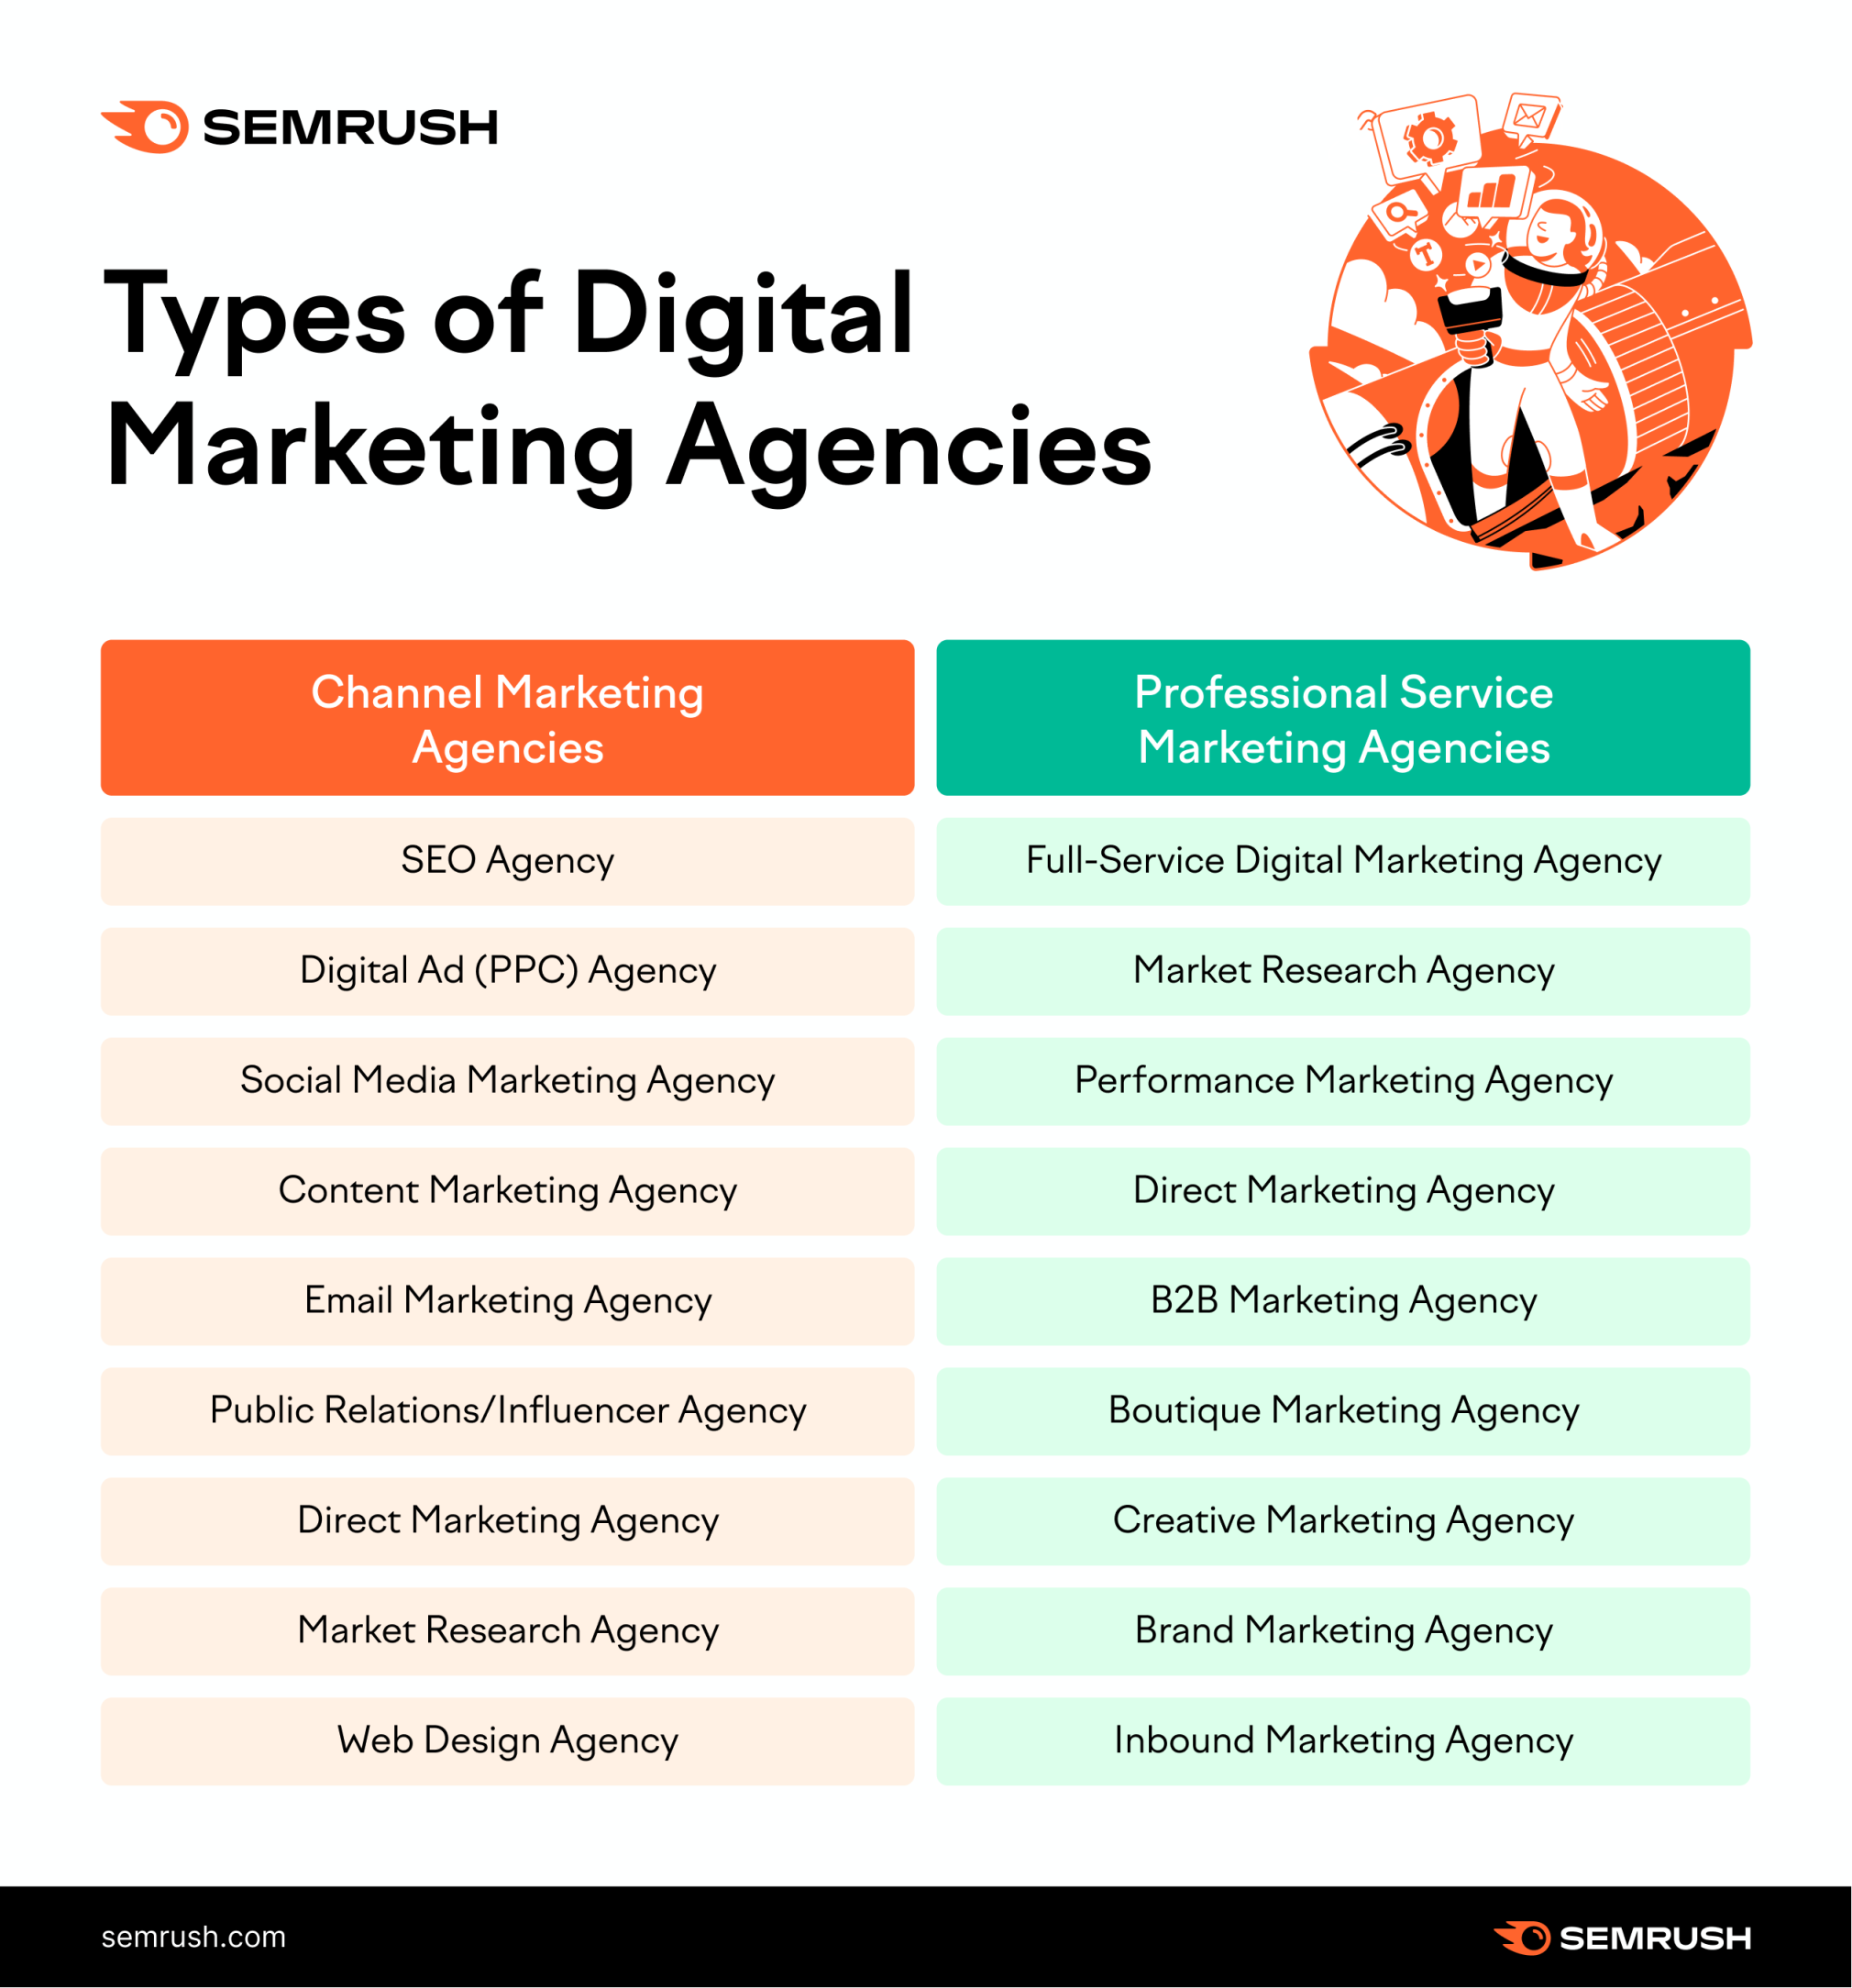 What are the types of digital agencies?